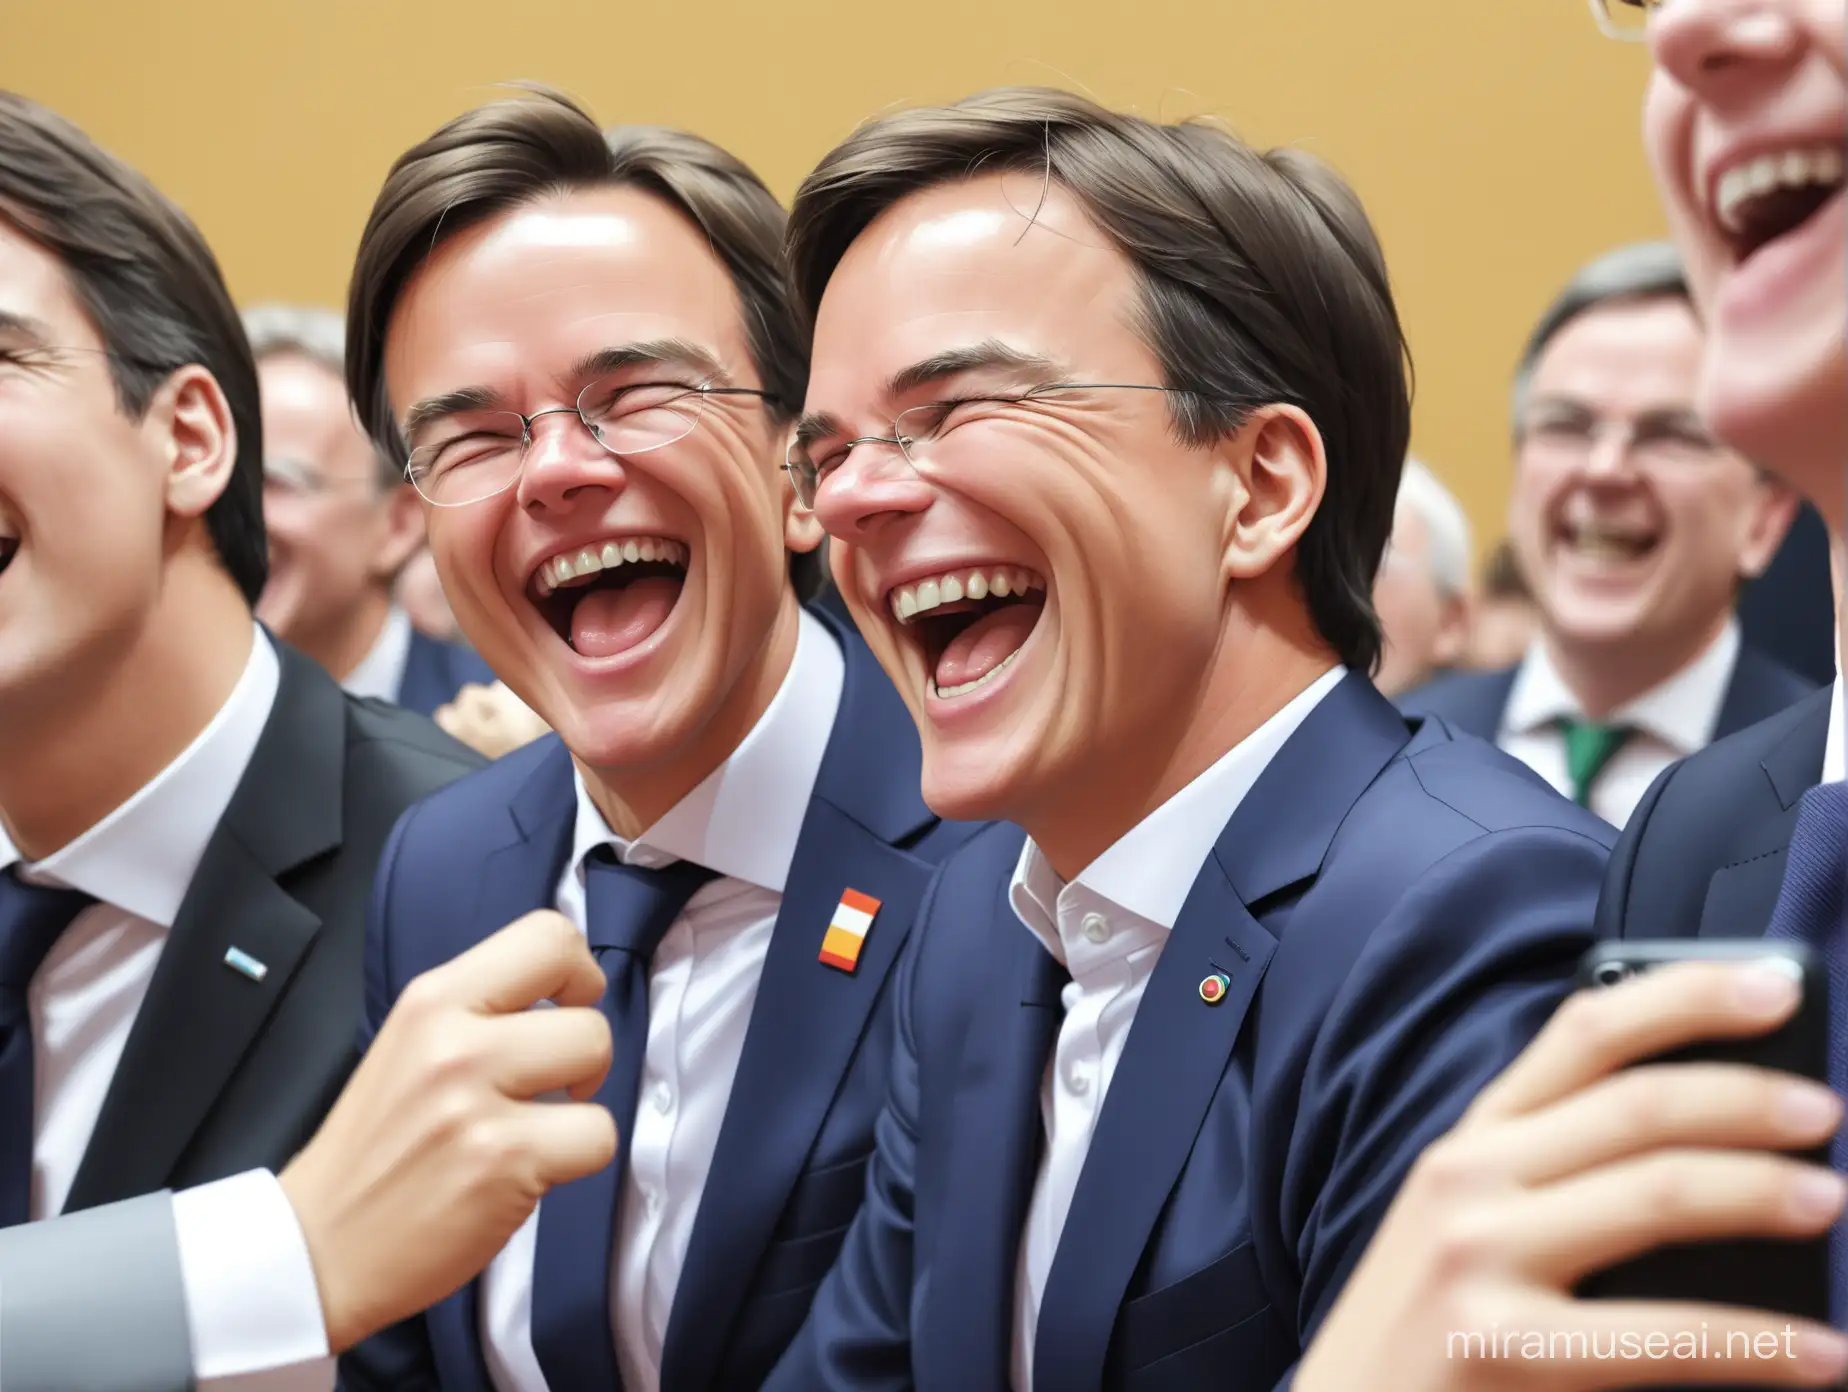 Rutte laughing